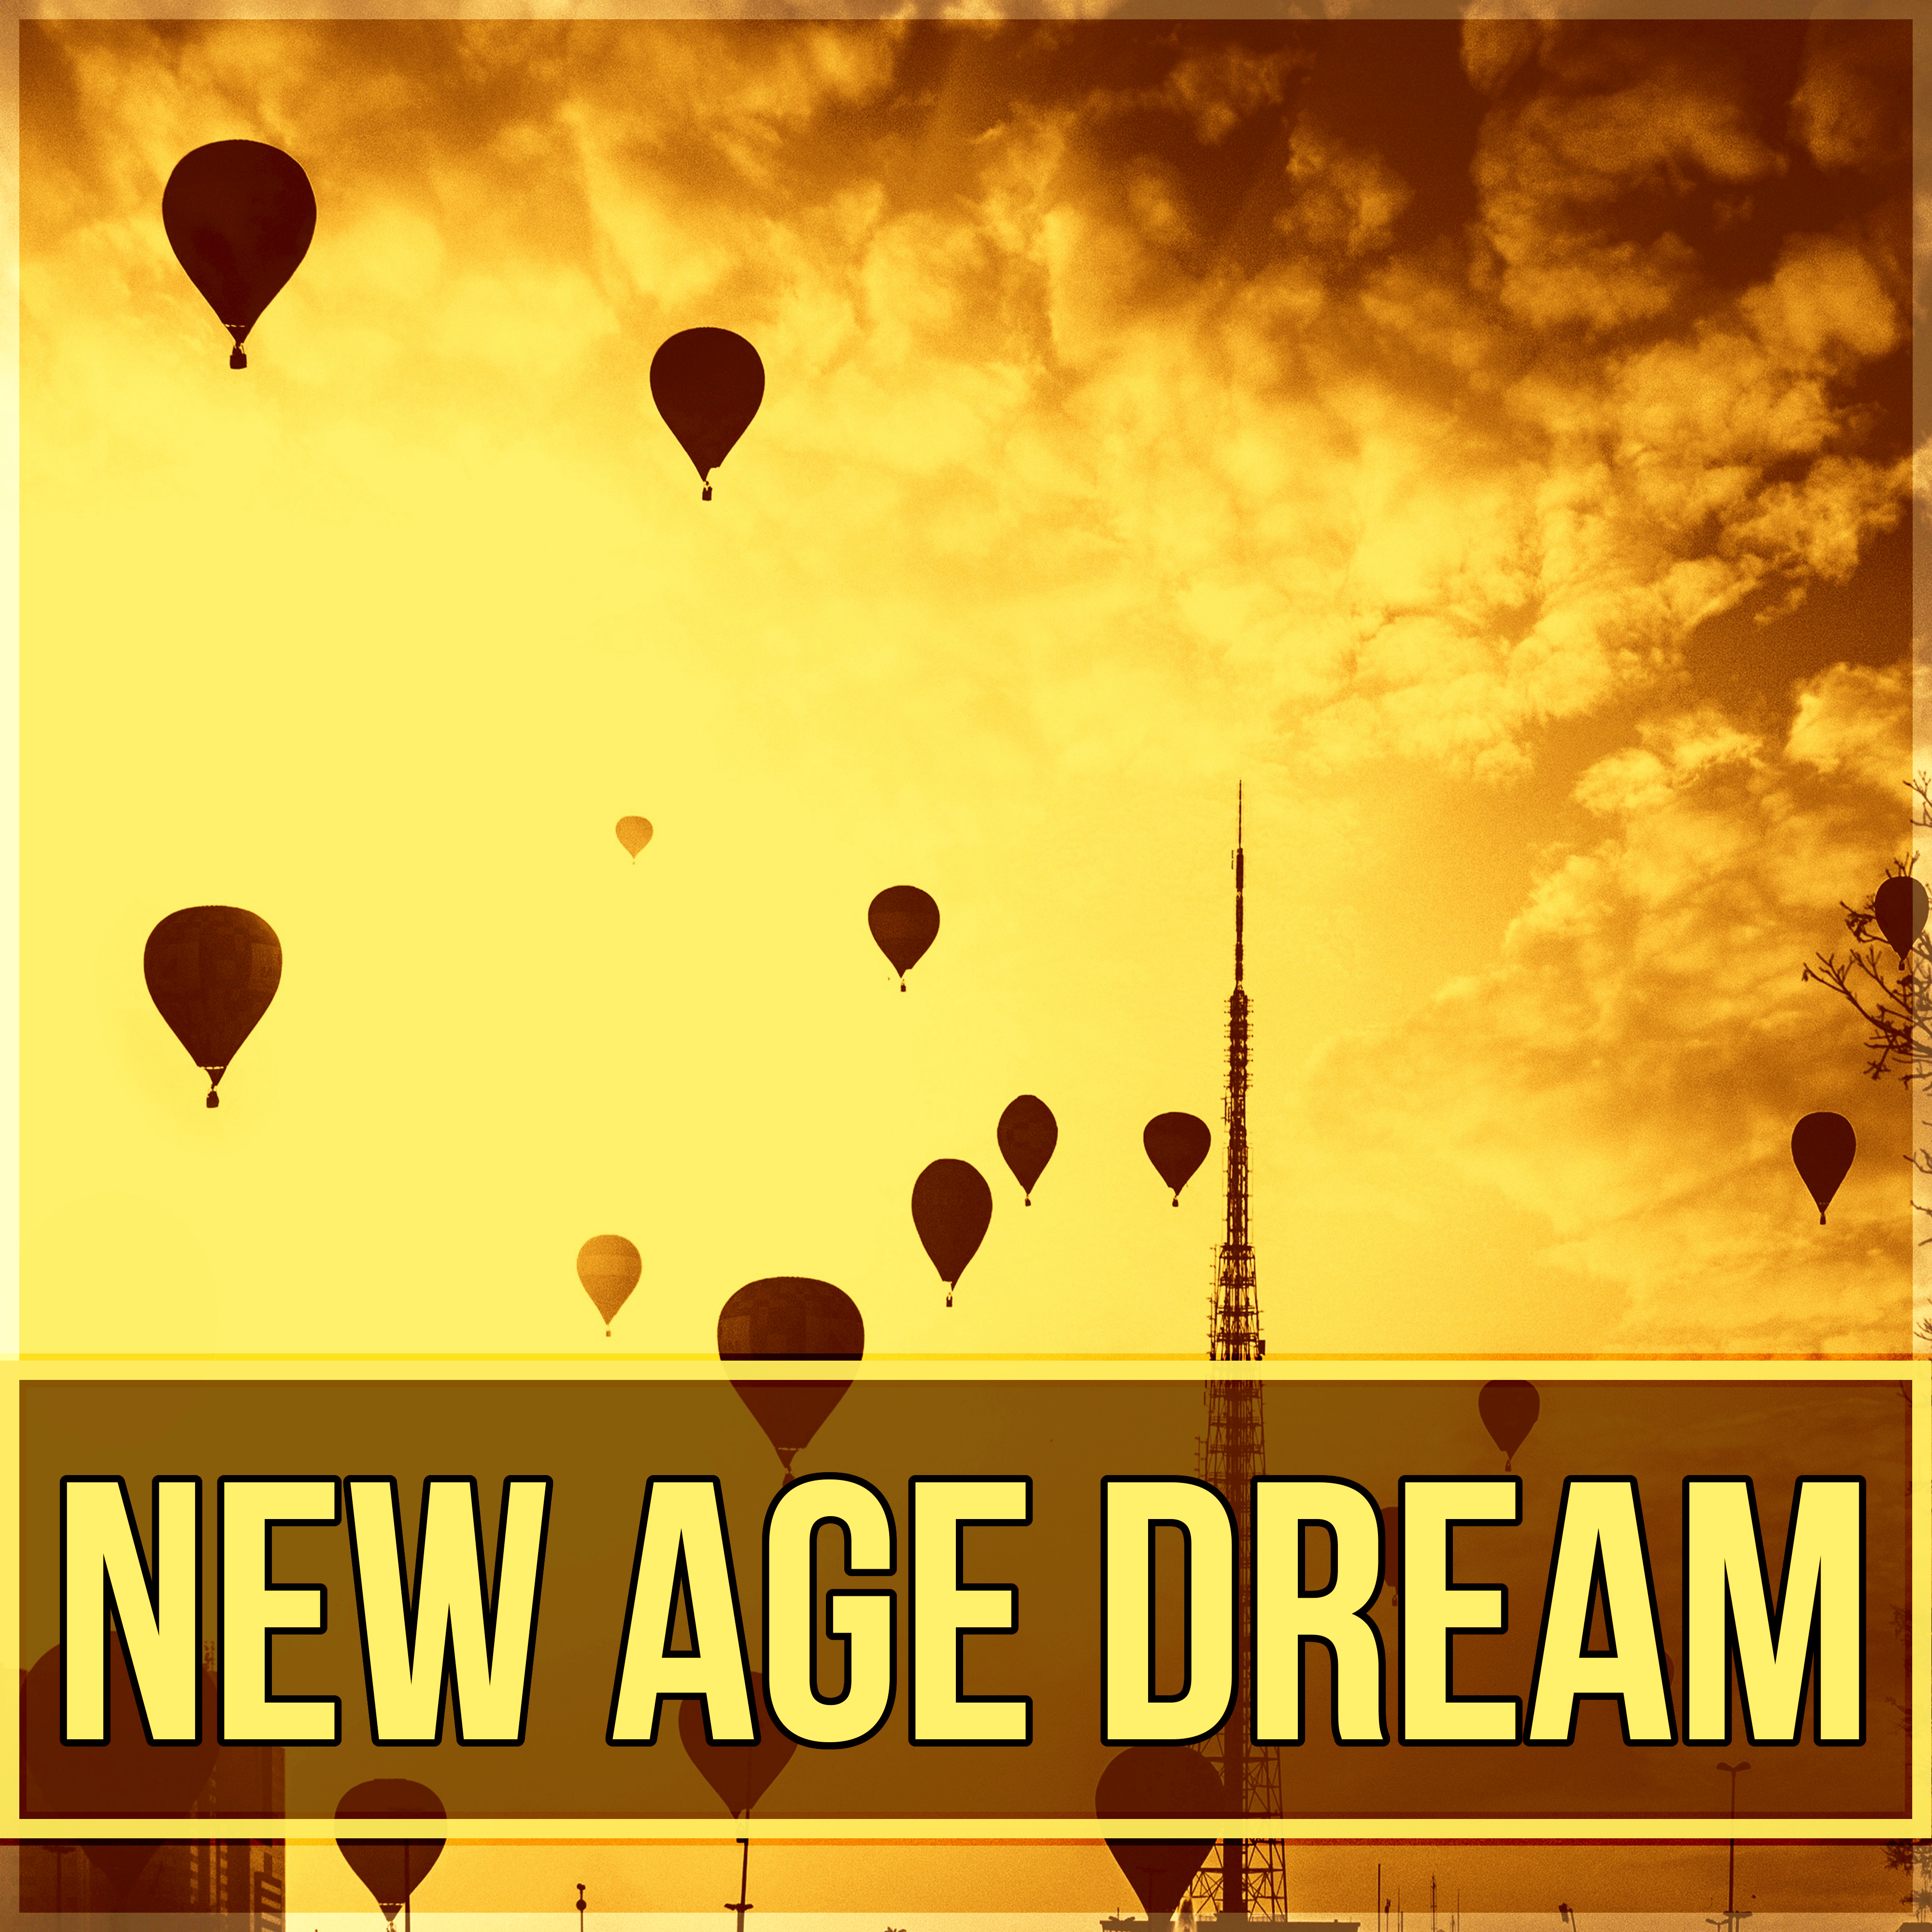 New Age Dream – Soothing Music, Relaxation, Ocean Waves Sounds, Calming Quiet, Healing Sleep, Sounds of Nature, White Noise